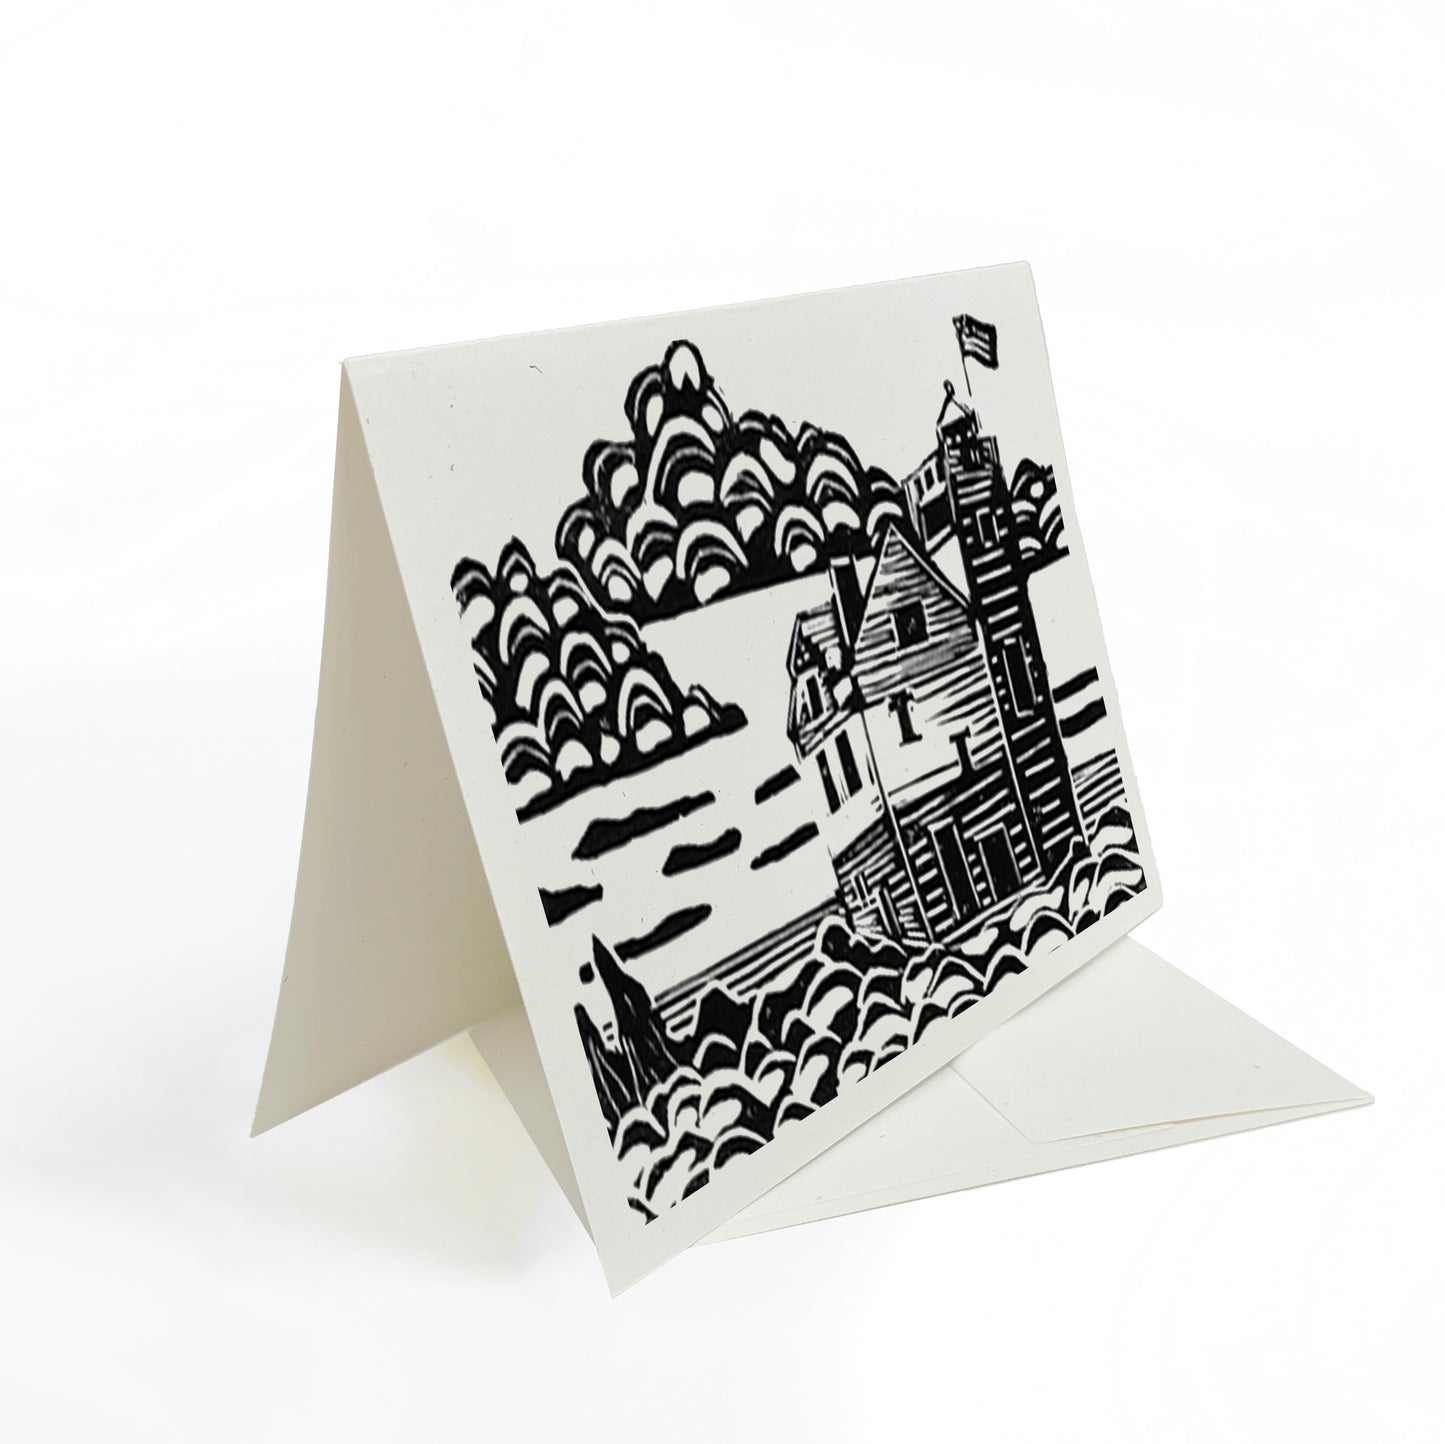 Round Island Lighthouse.  A casually elegant card featuring a digital reproduction of a block print design with the same title by Natalia Wohletz of Peninsula Prints, Milford and Mackinac Island, Michigan.